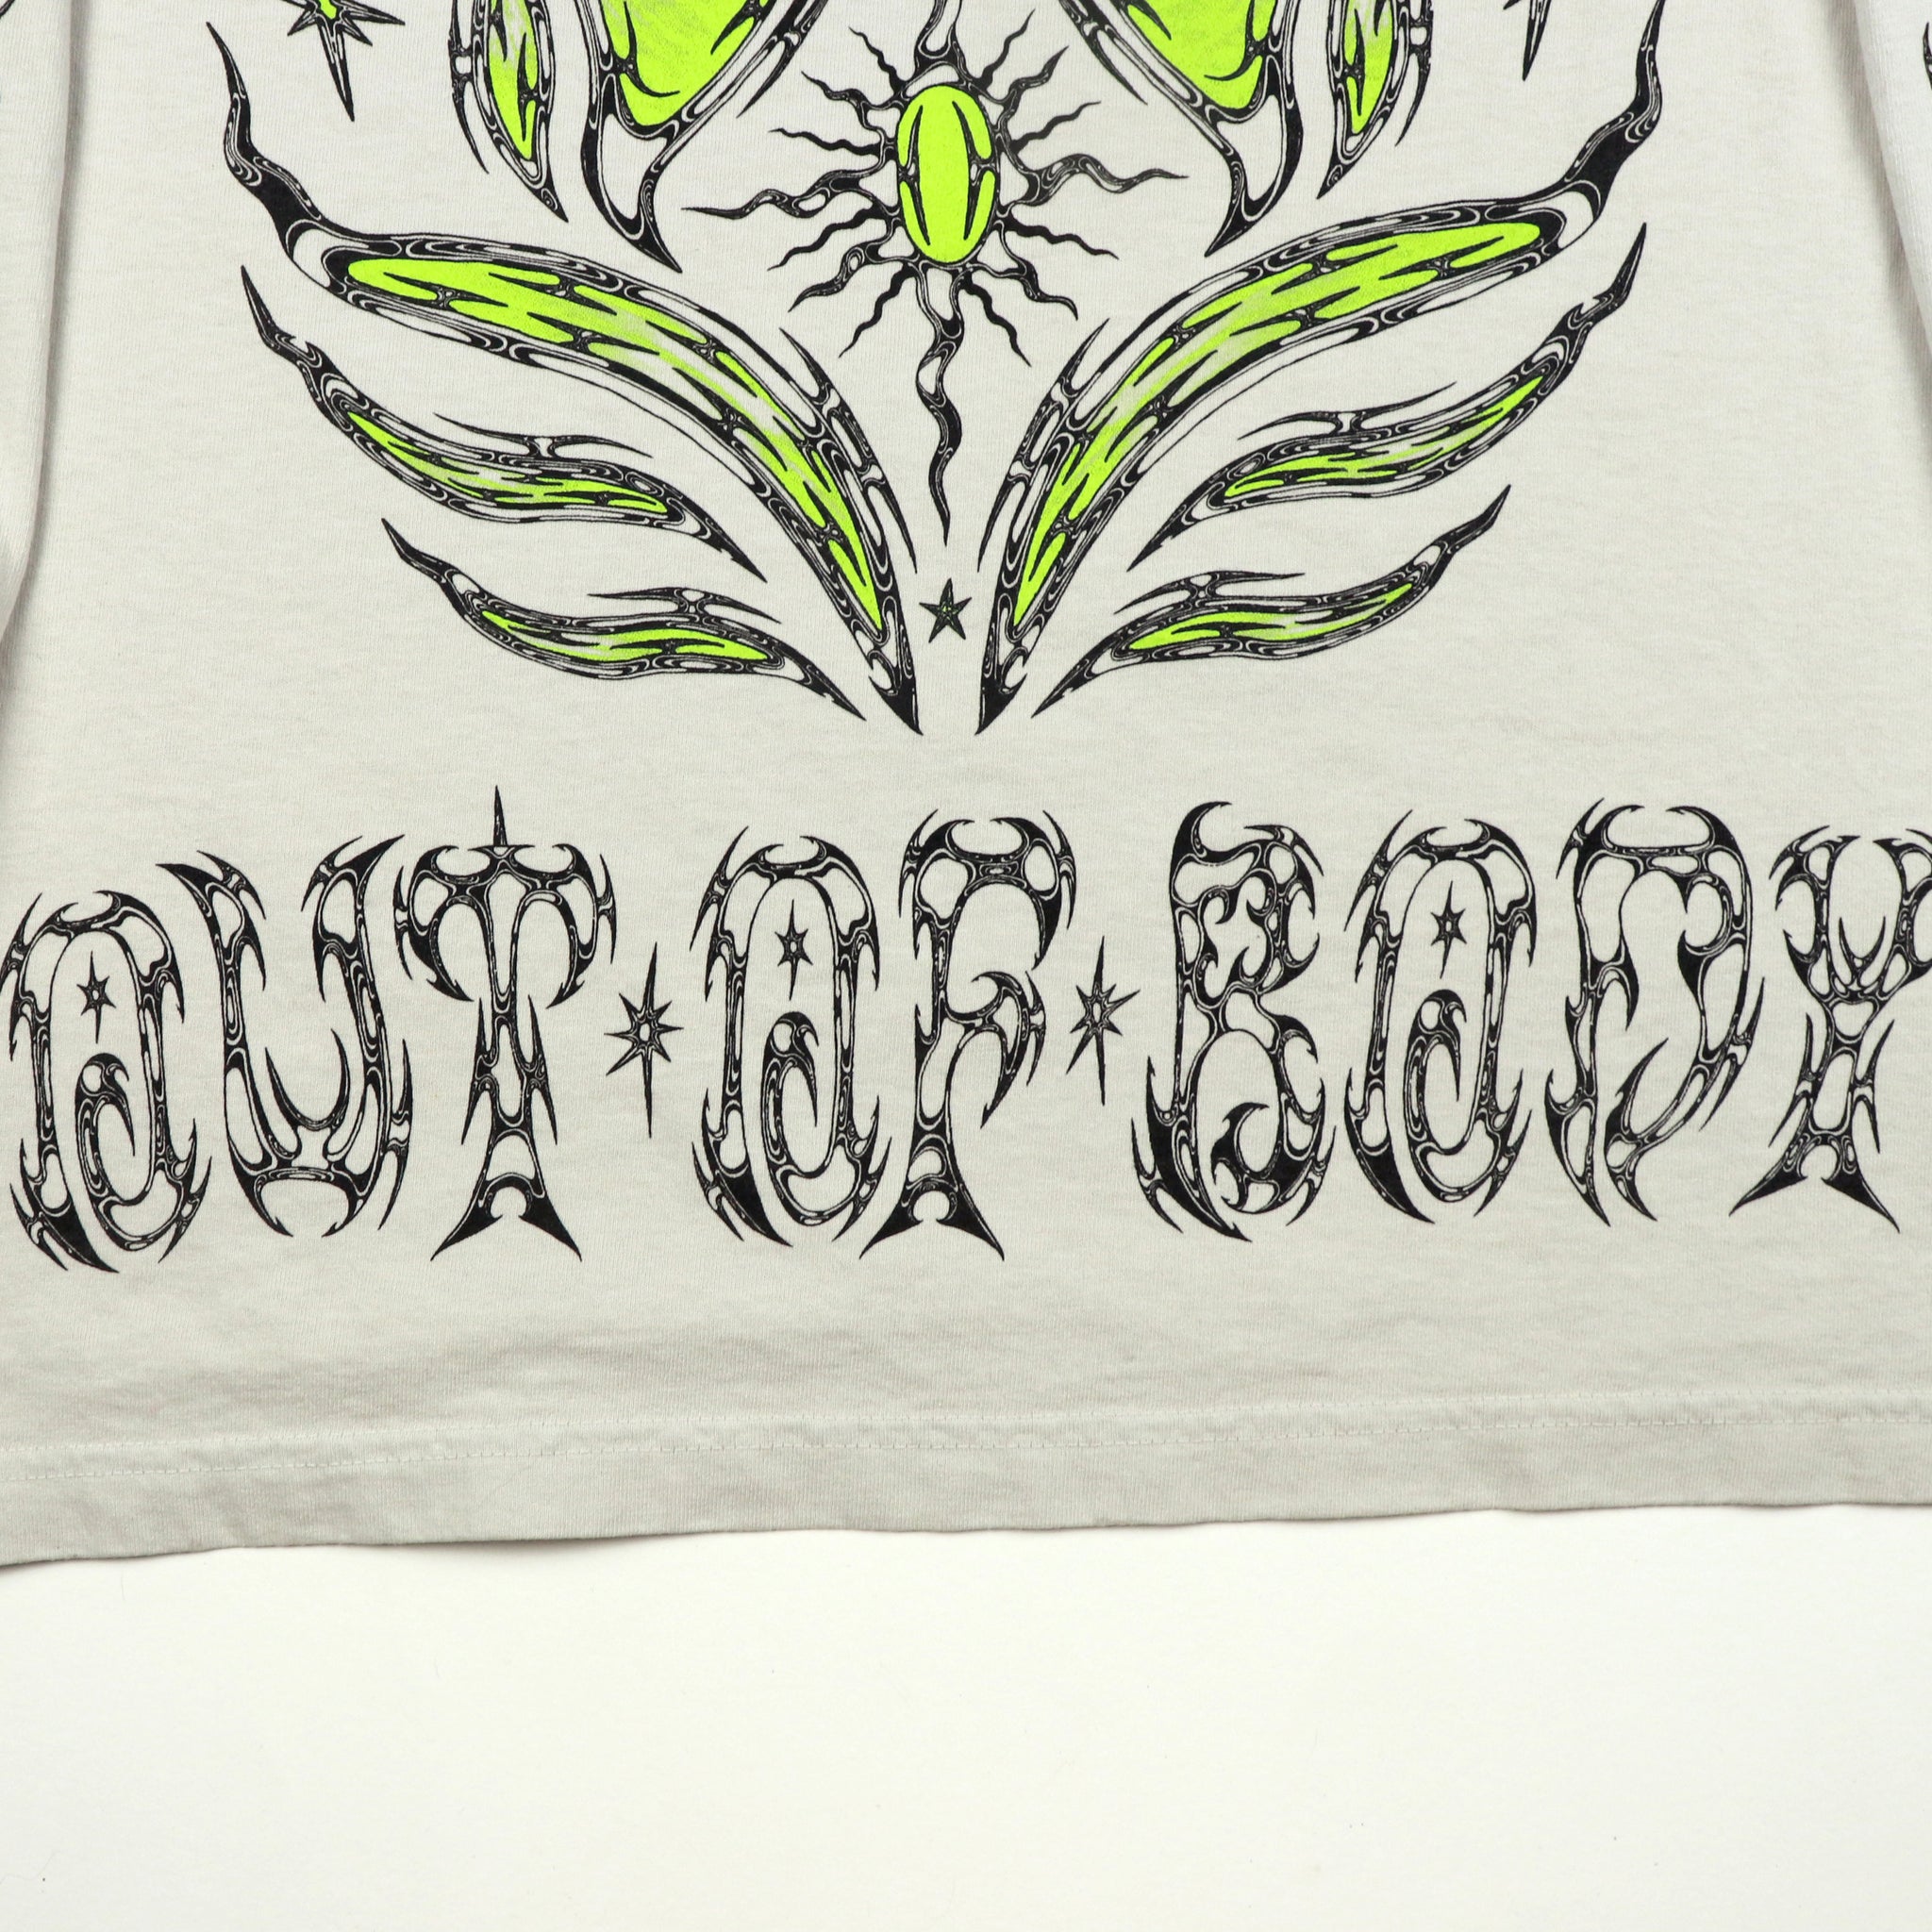 OUT OF BODY LONG SLEEVE ( GREEN )